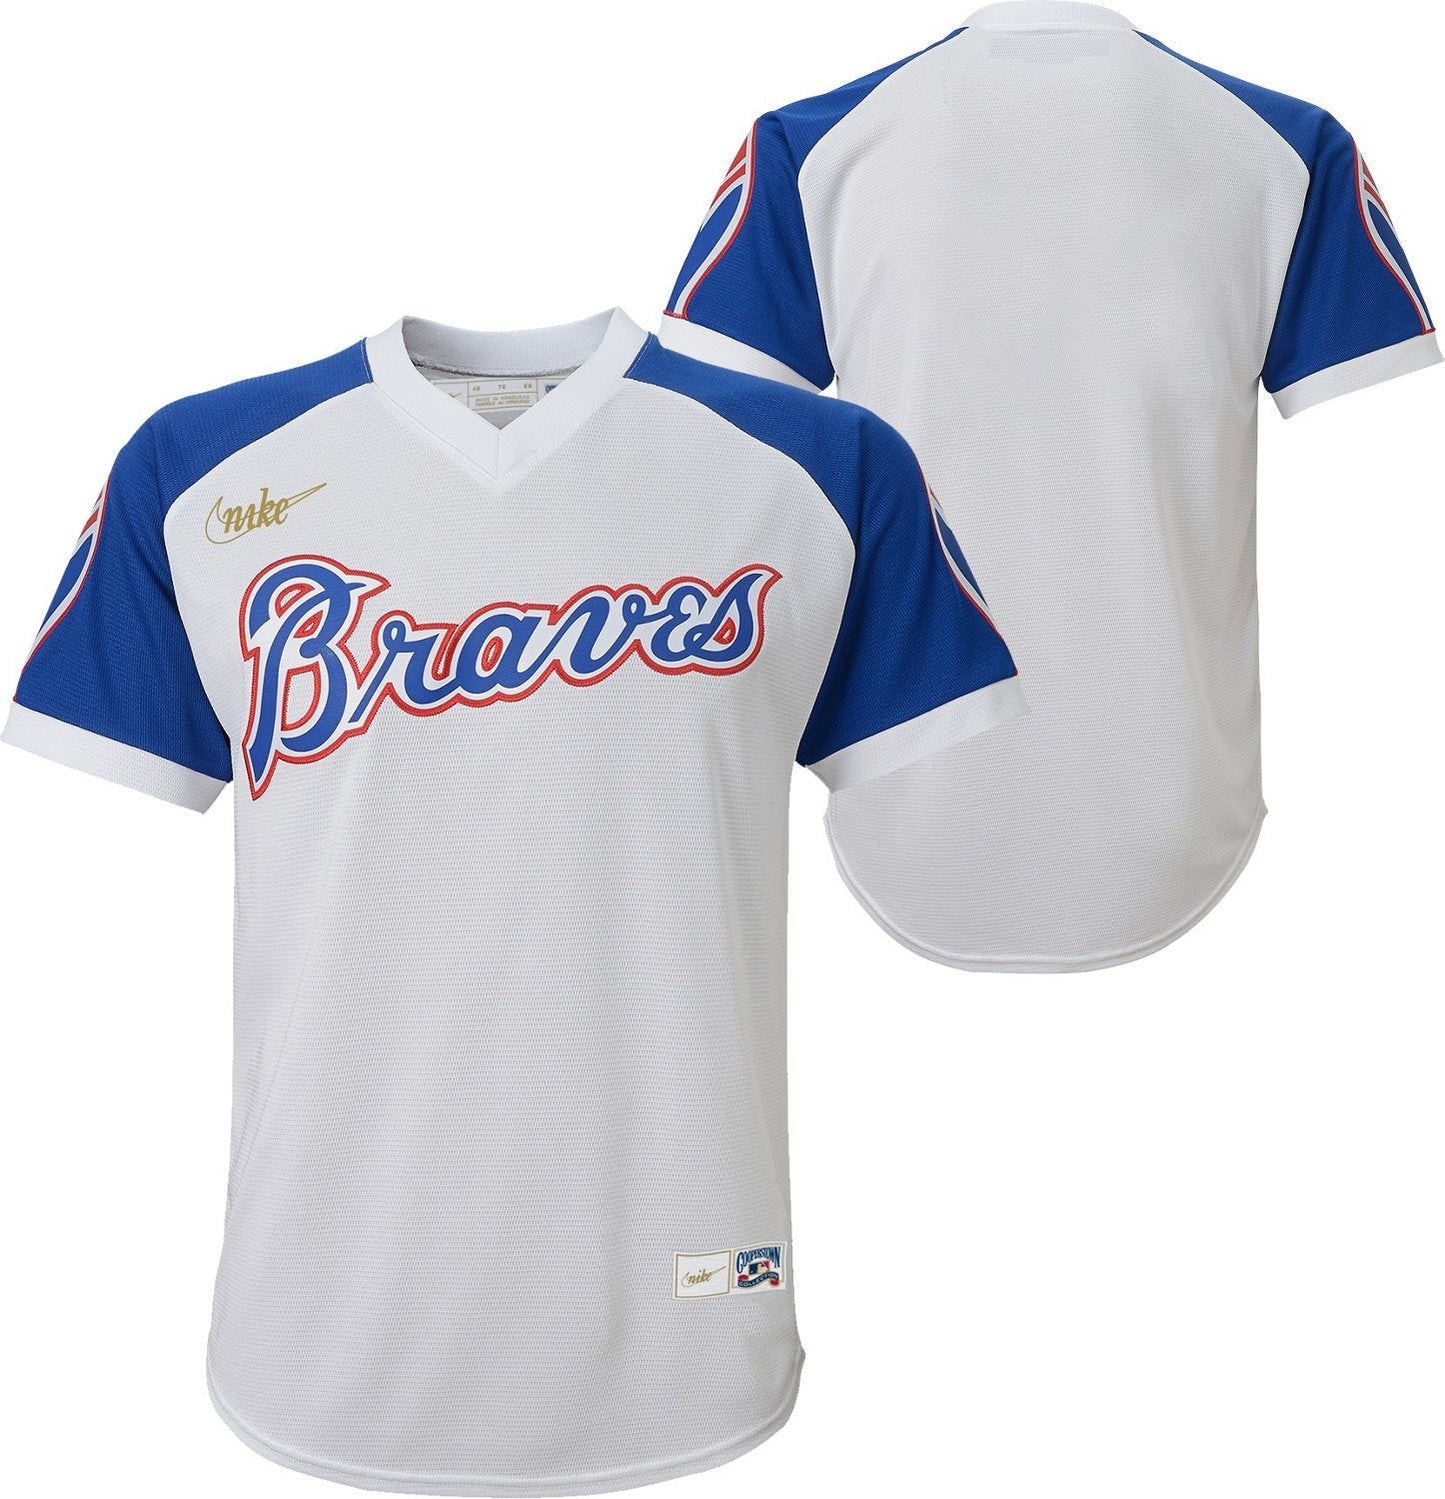 Nike Youth Atlanta Braves Cooperstown Home Replica Jersey